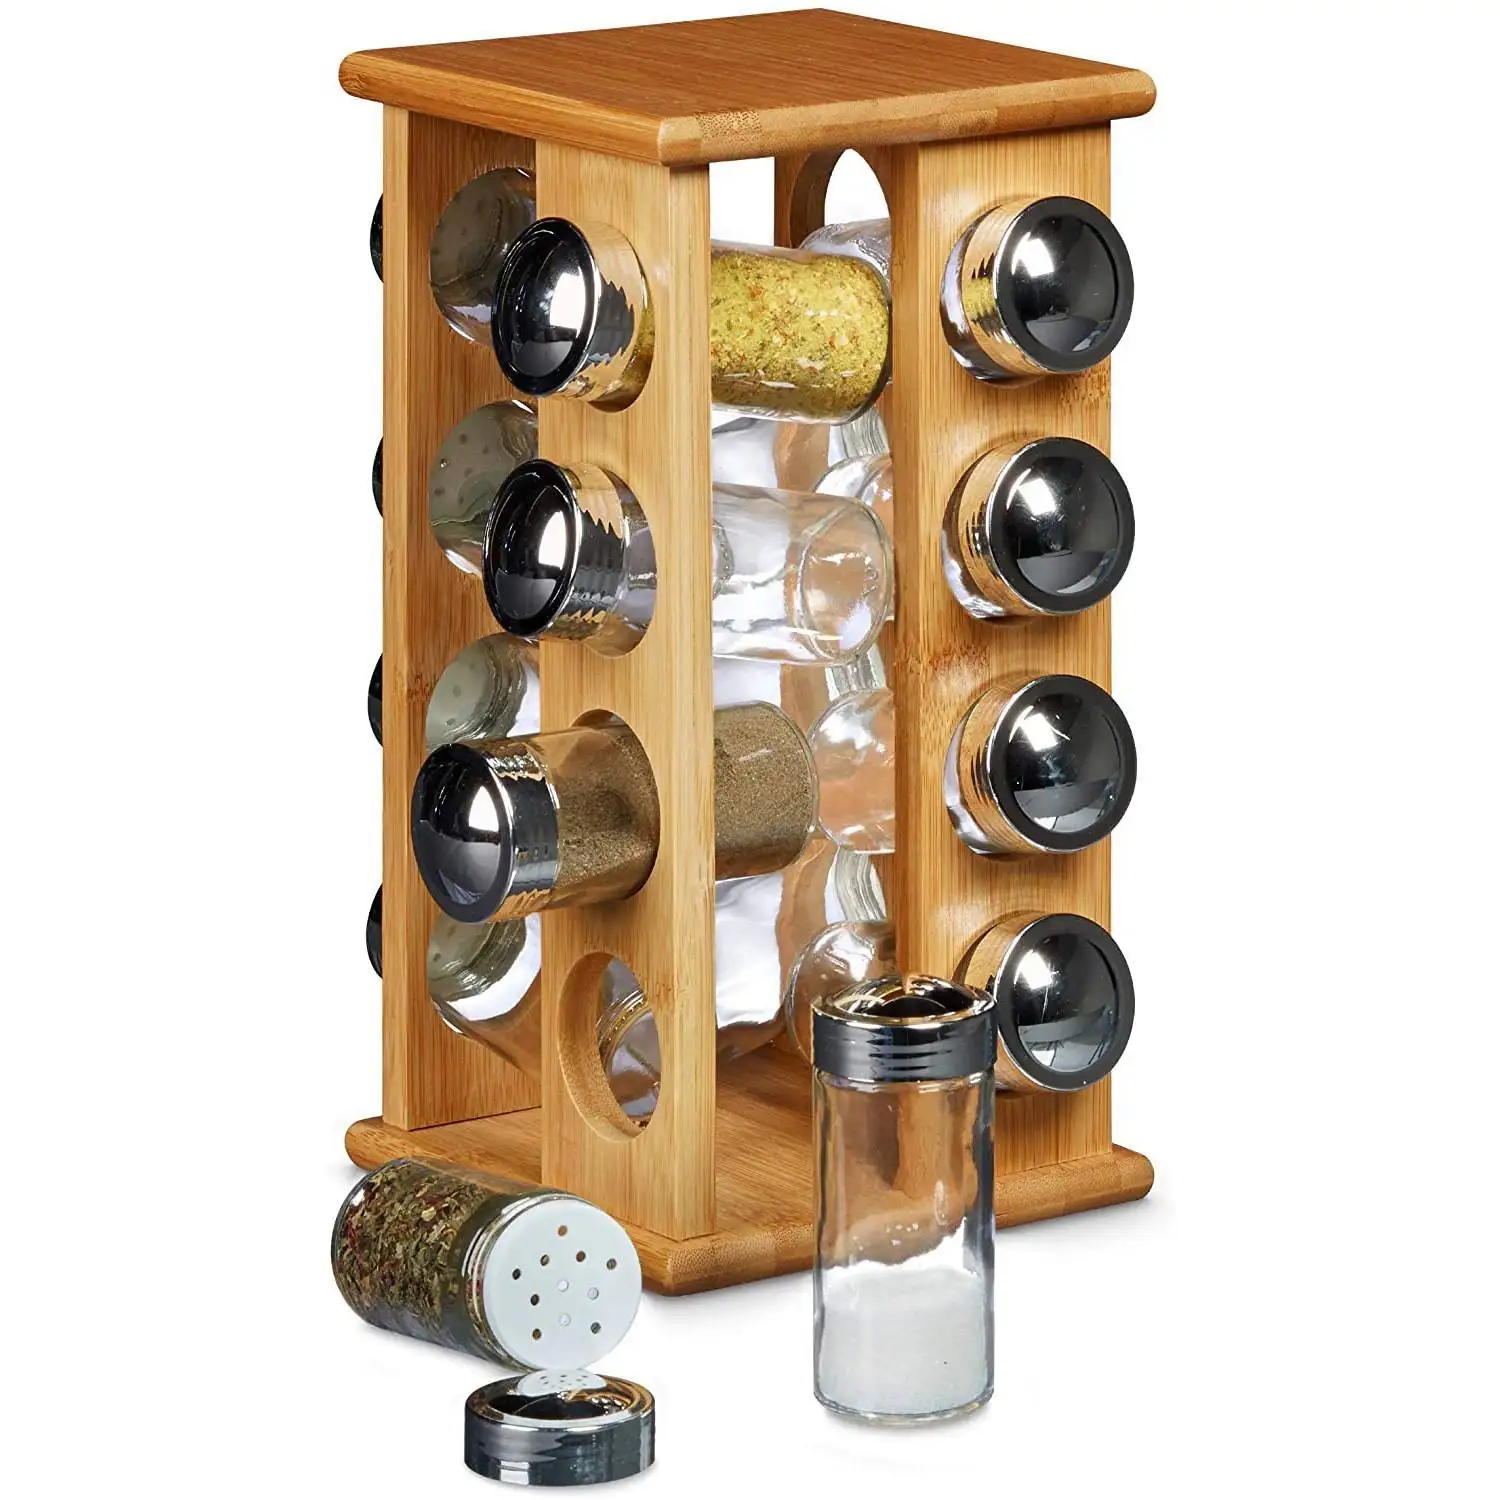 Bamboo Rotating Spice Carousel Lazy Susan for Countertop Stackable Bamboo Revolving Spice Organizer Rack with 12 Glass Spice Jar